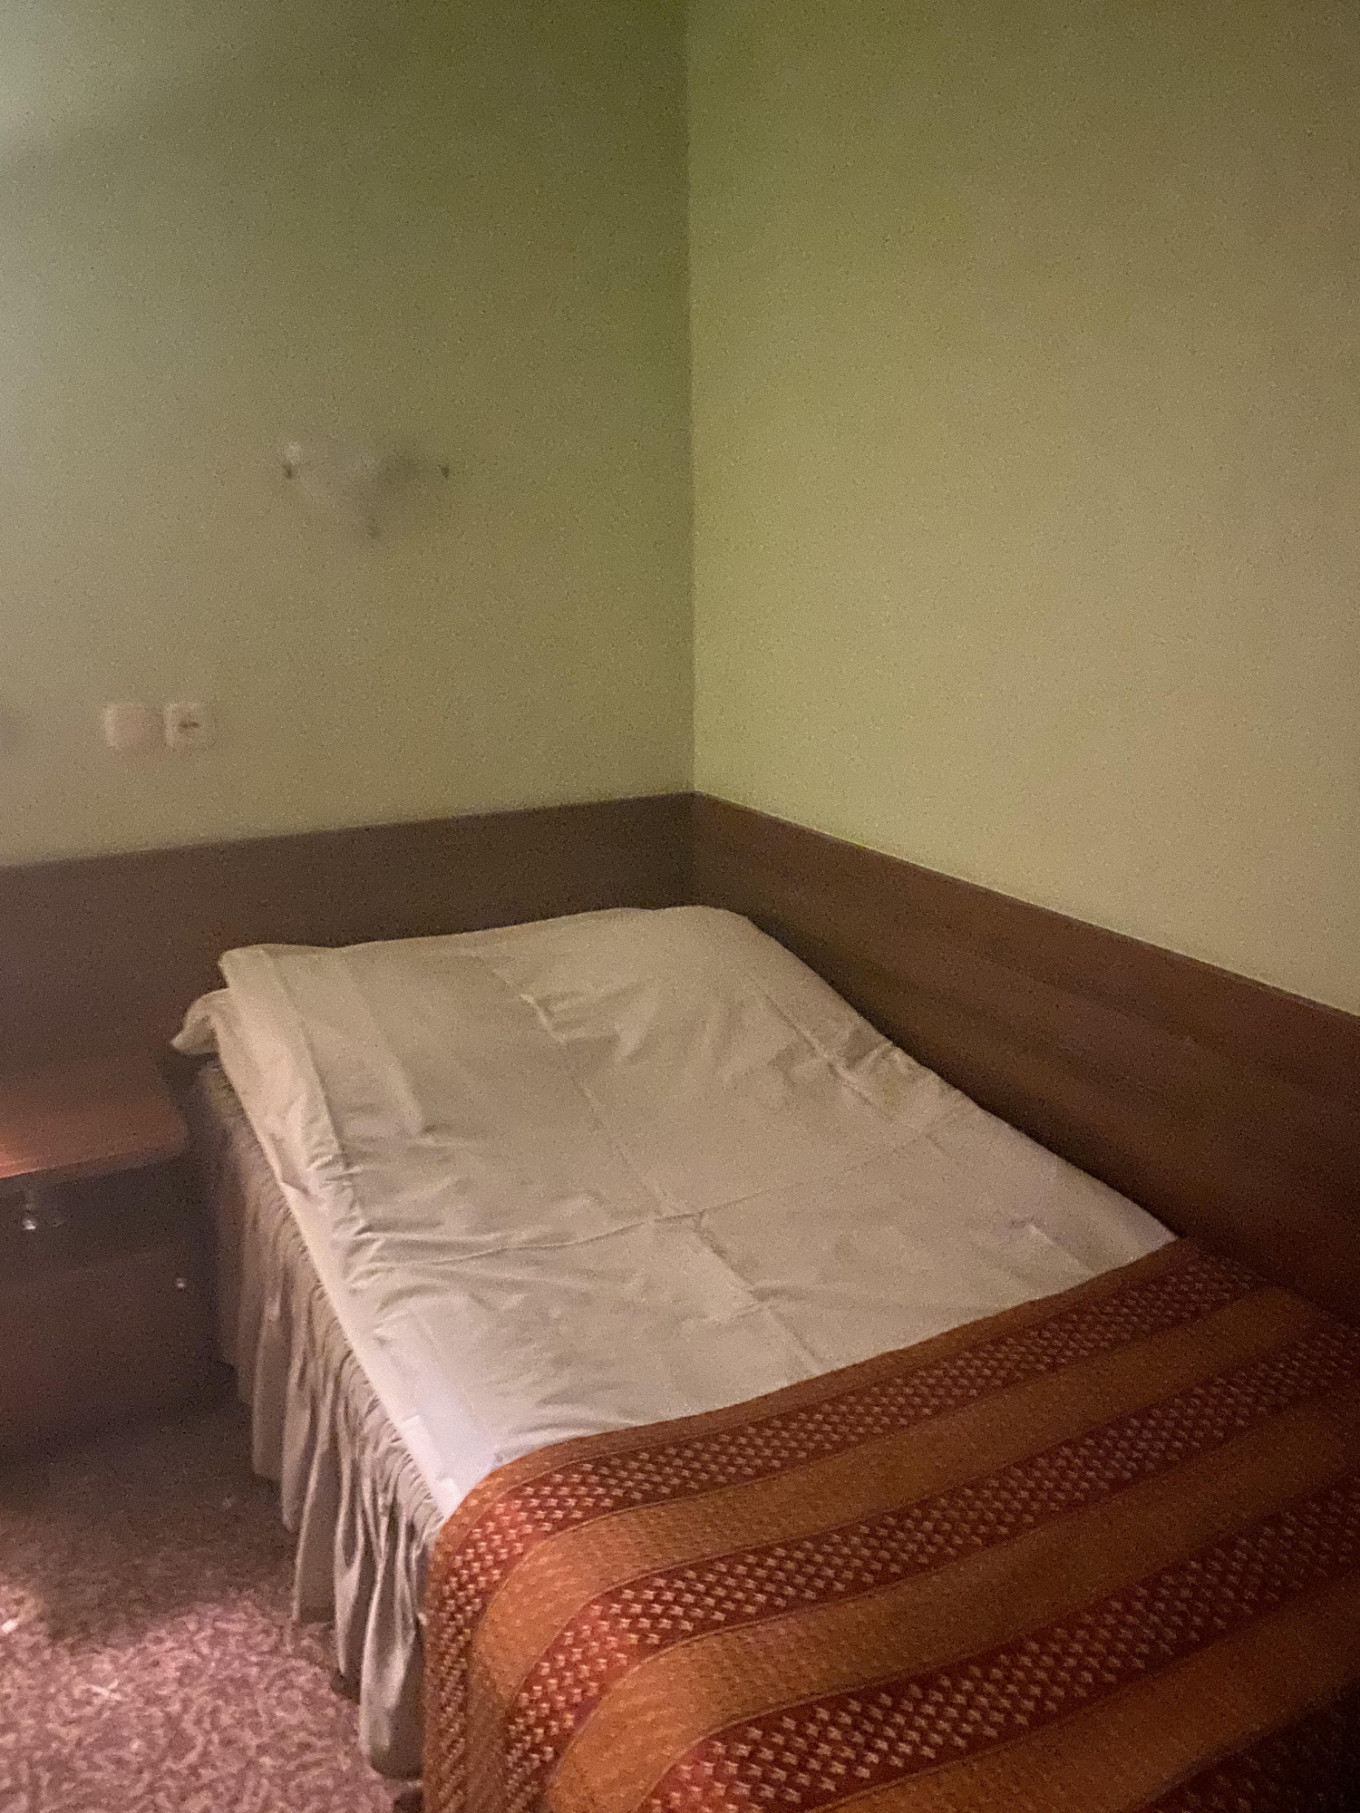   				Migrants are paying thousands of dollars to stay in basic hotel rooms like this one in the Hotel Sputnik in Minsk.				 							